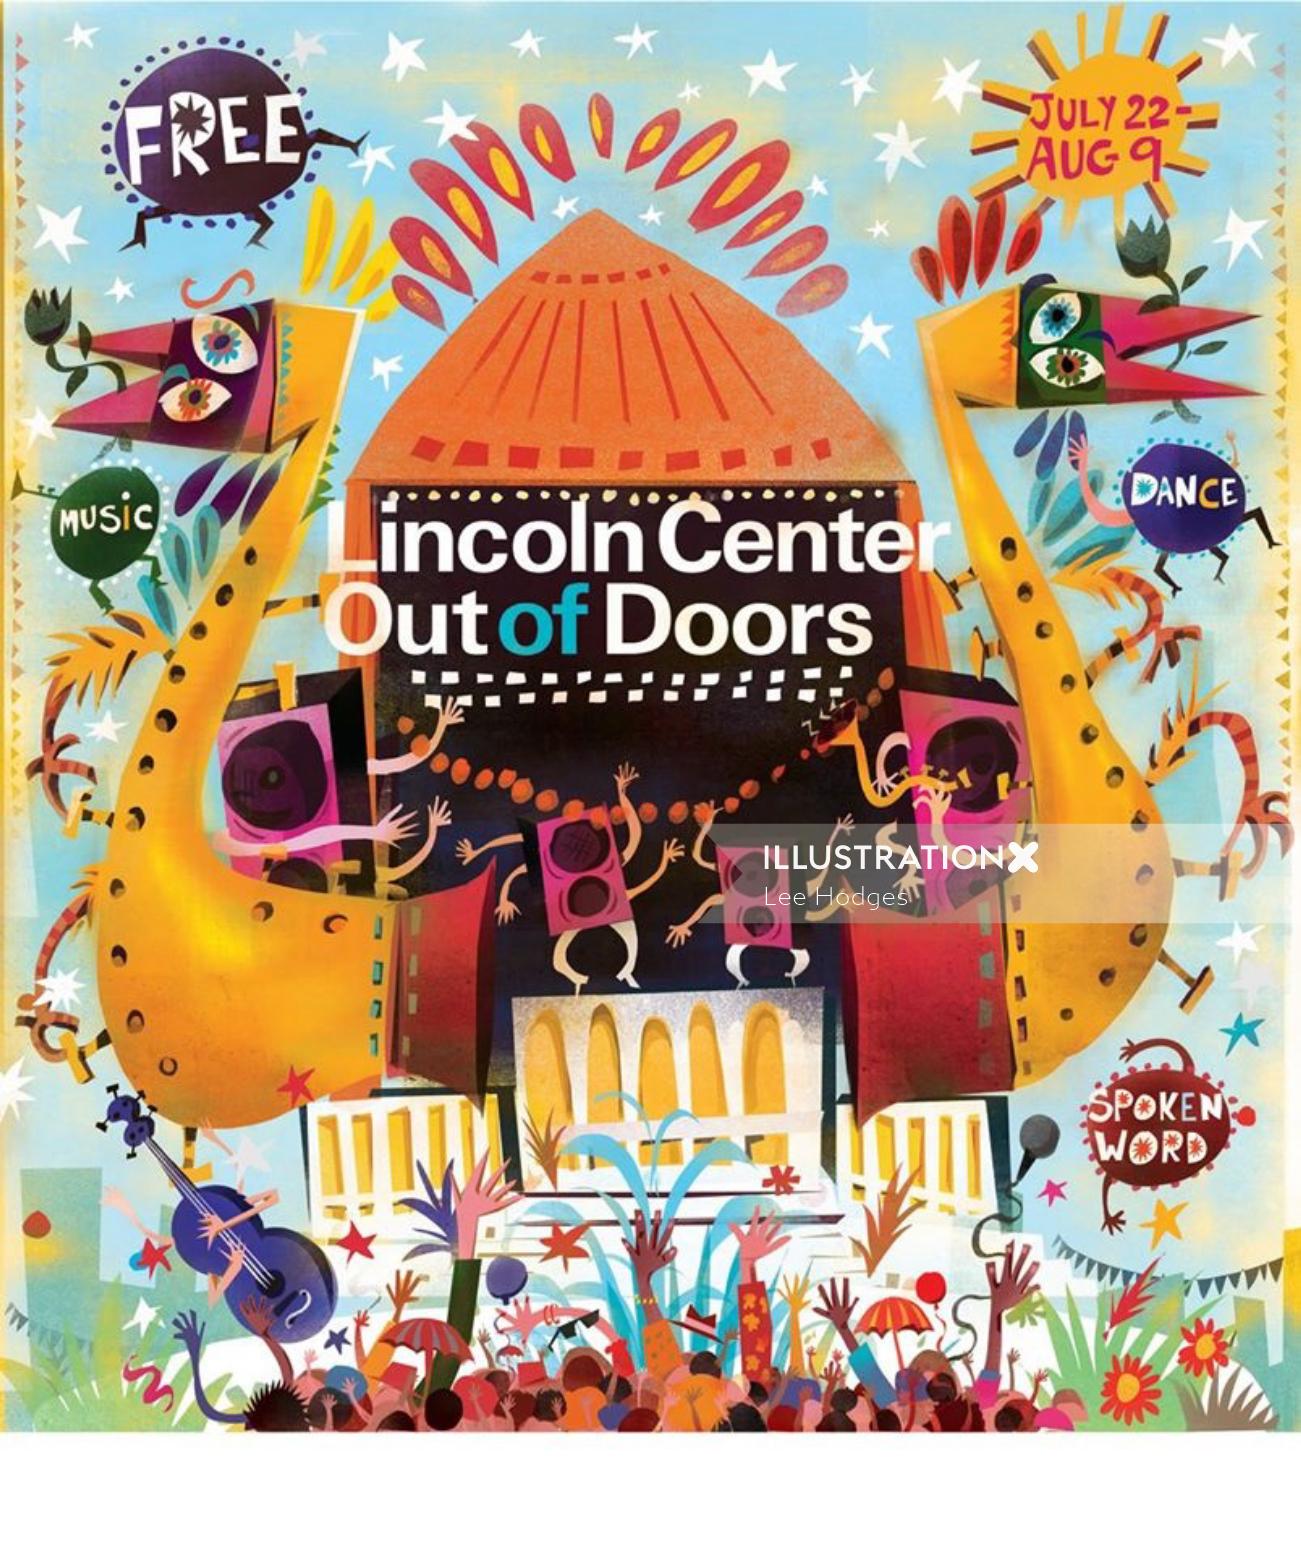 Lincoln out of doors free music festival